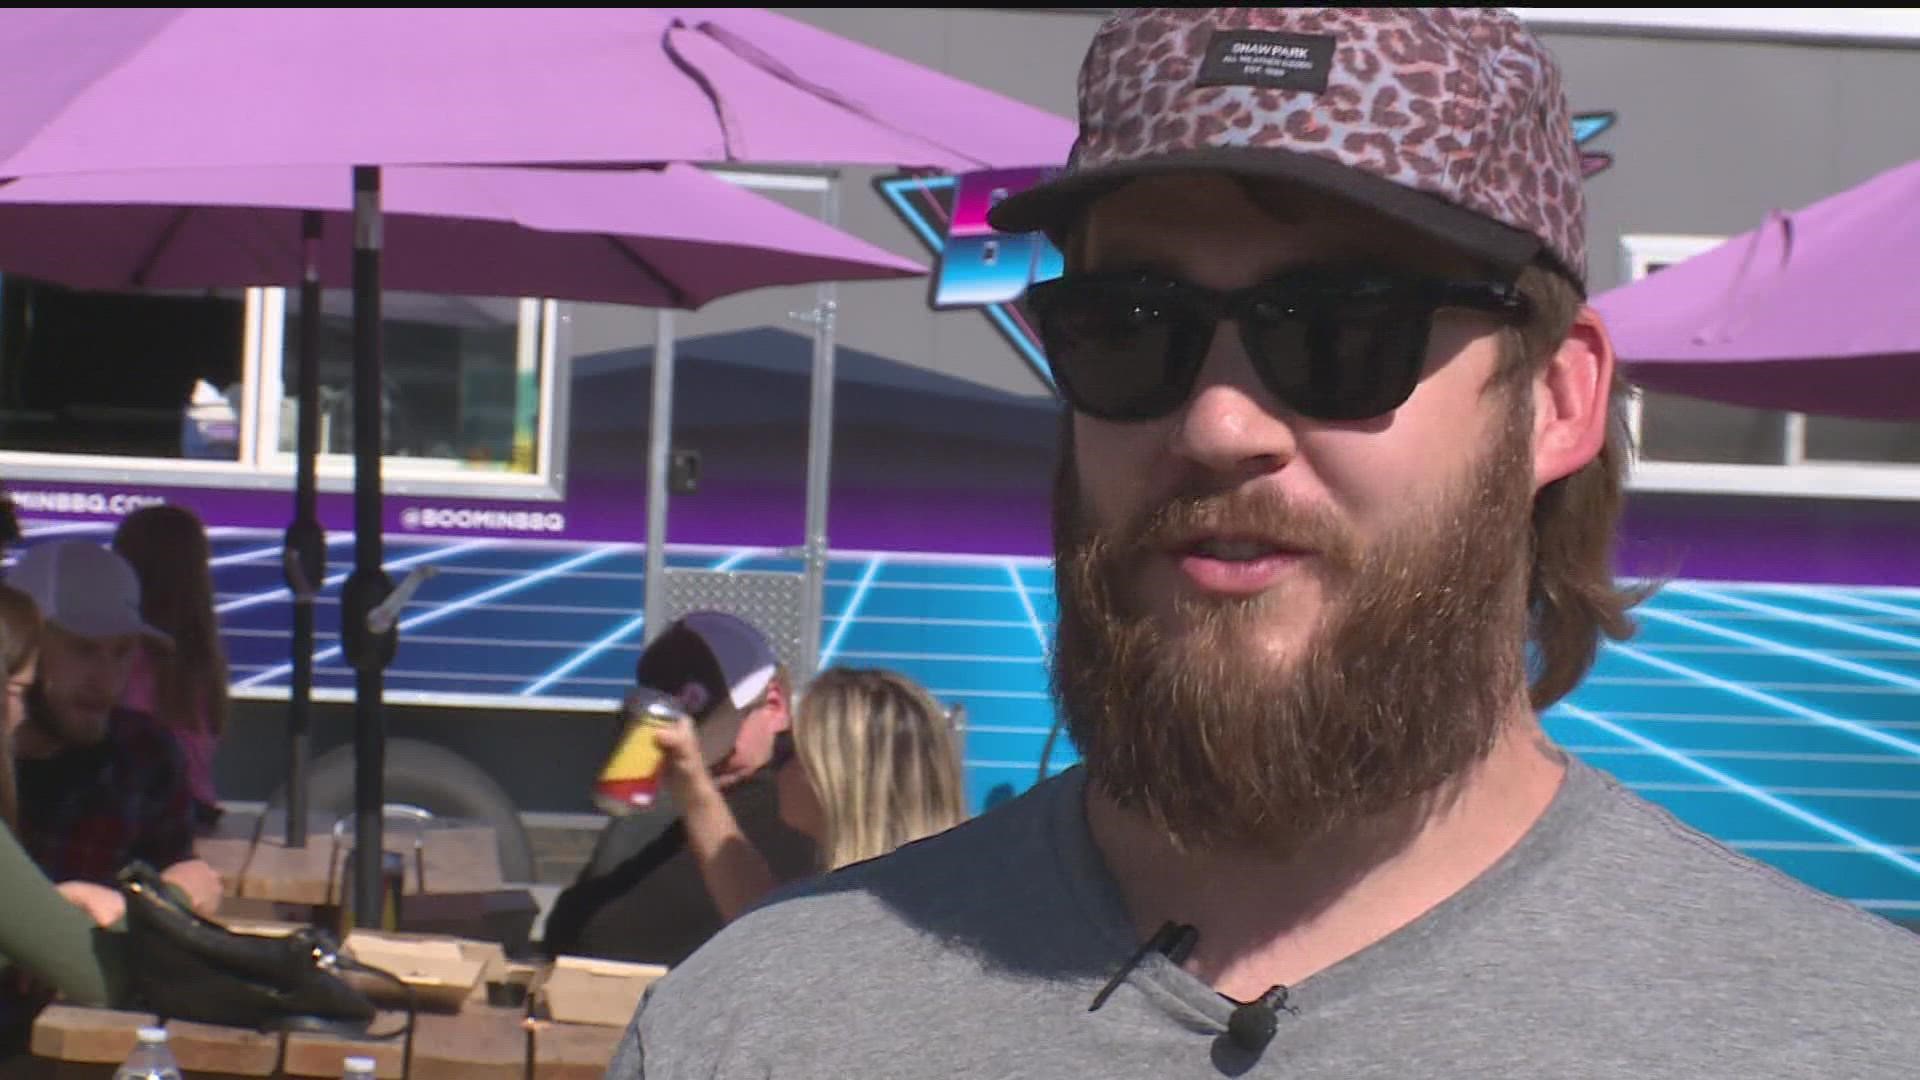 Boomin' BBQ owner Dylan Boerboom says a new city ordinance, which bars food vendors from using external equipment, will drastically impact his ability to operate.